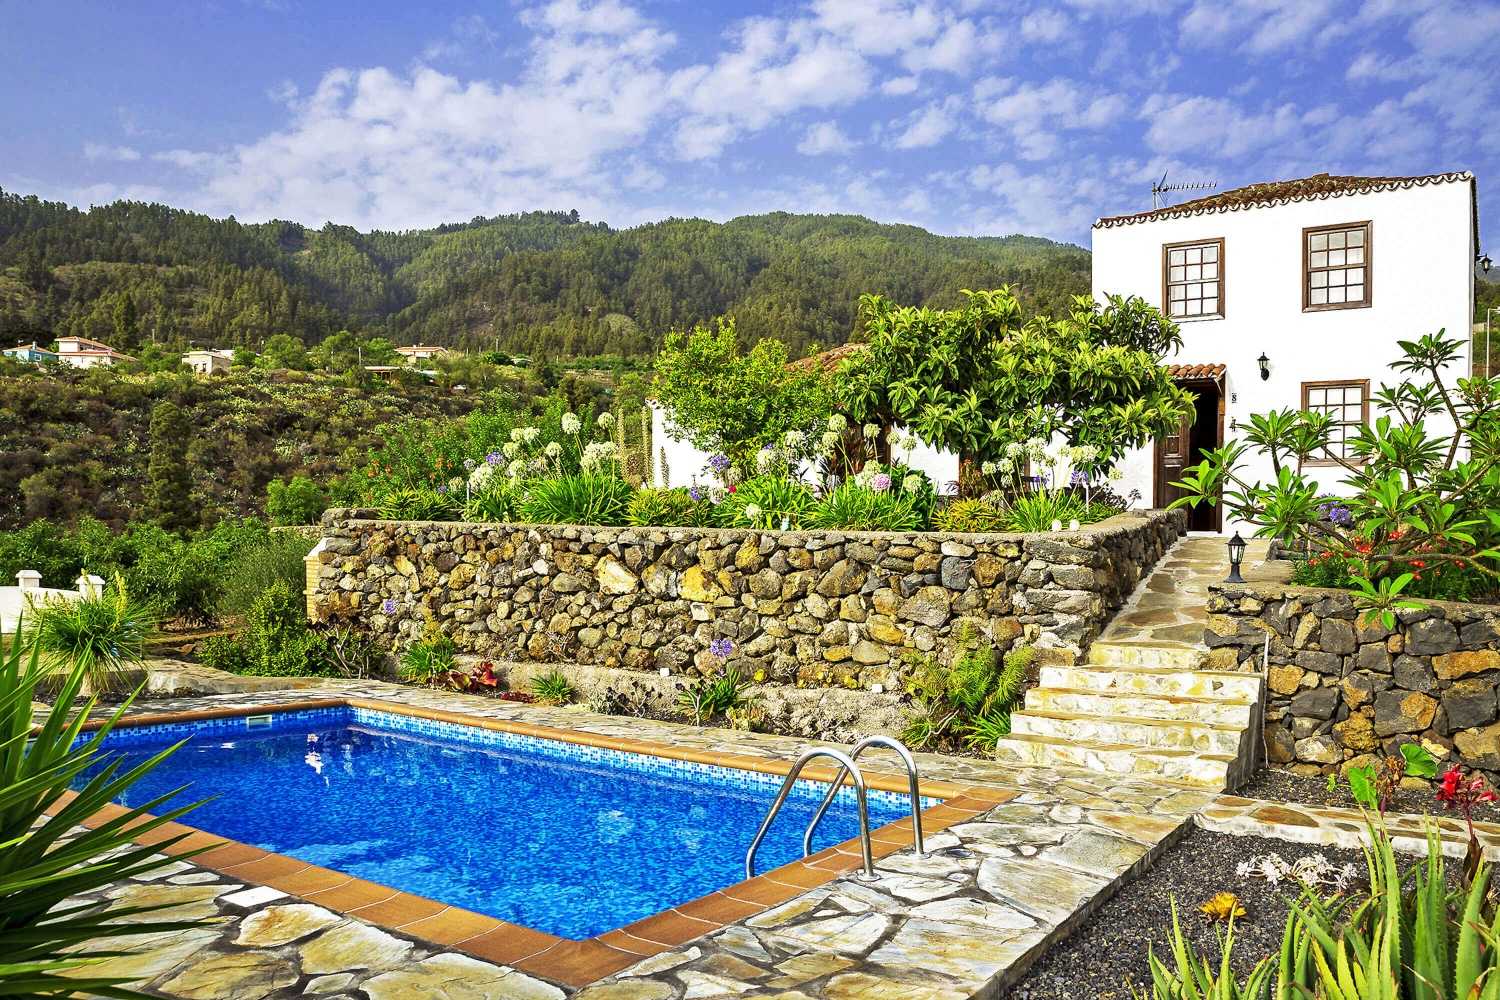 Charming country house with spectacular views on a large estate with gardens, fruit trees and a private pool